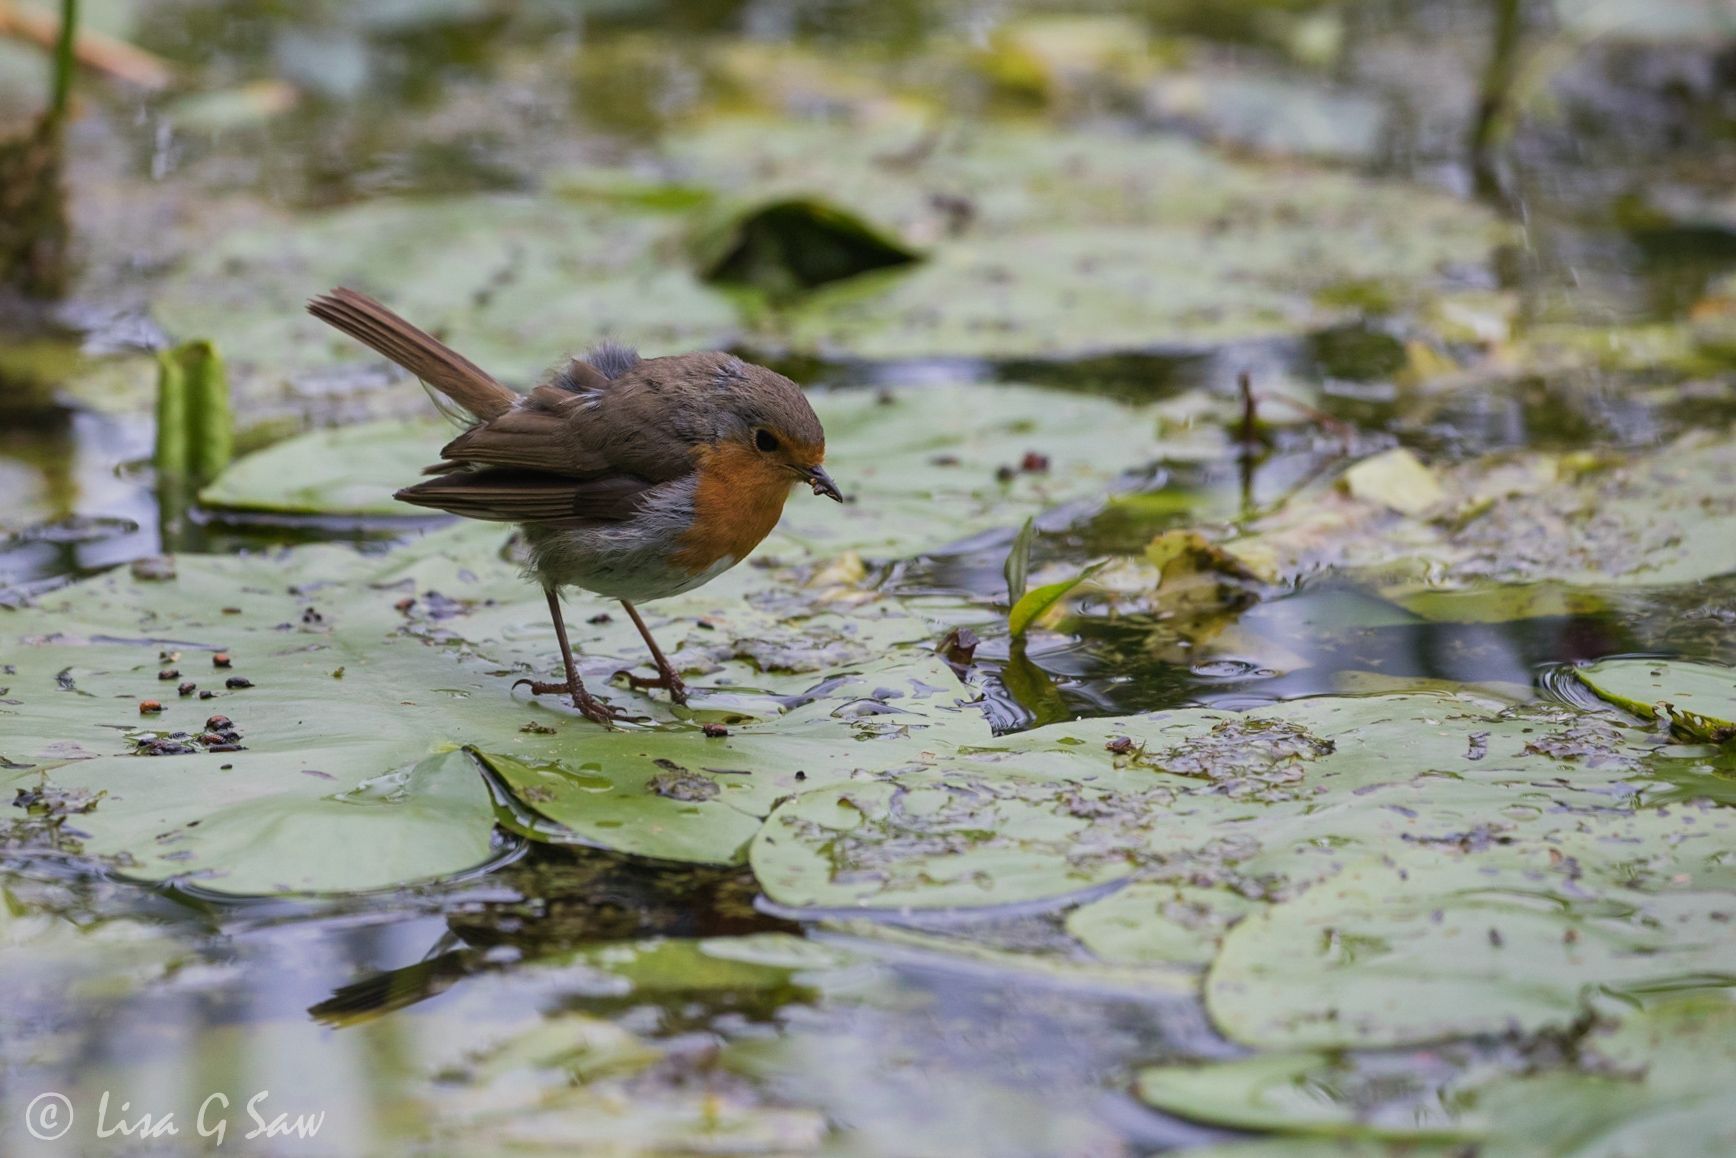 Robin on water lily leaf